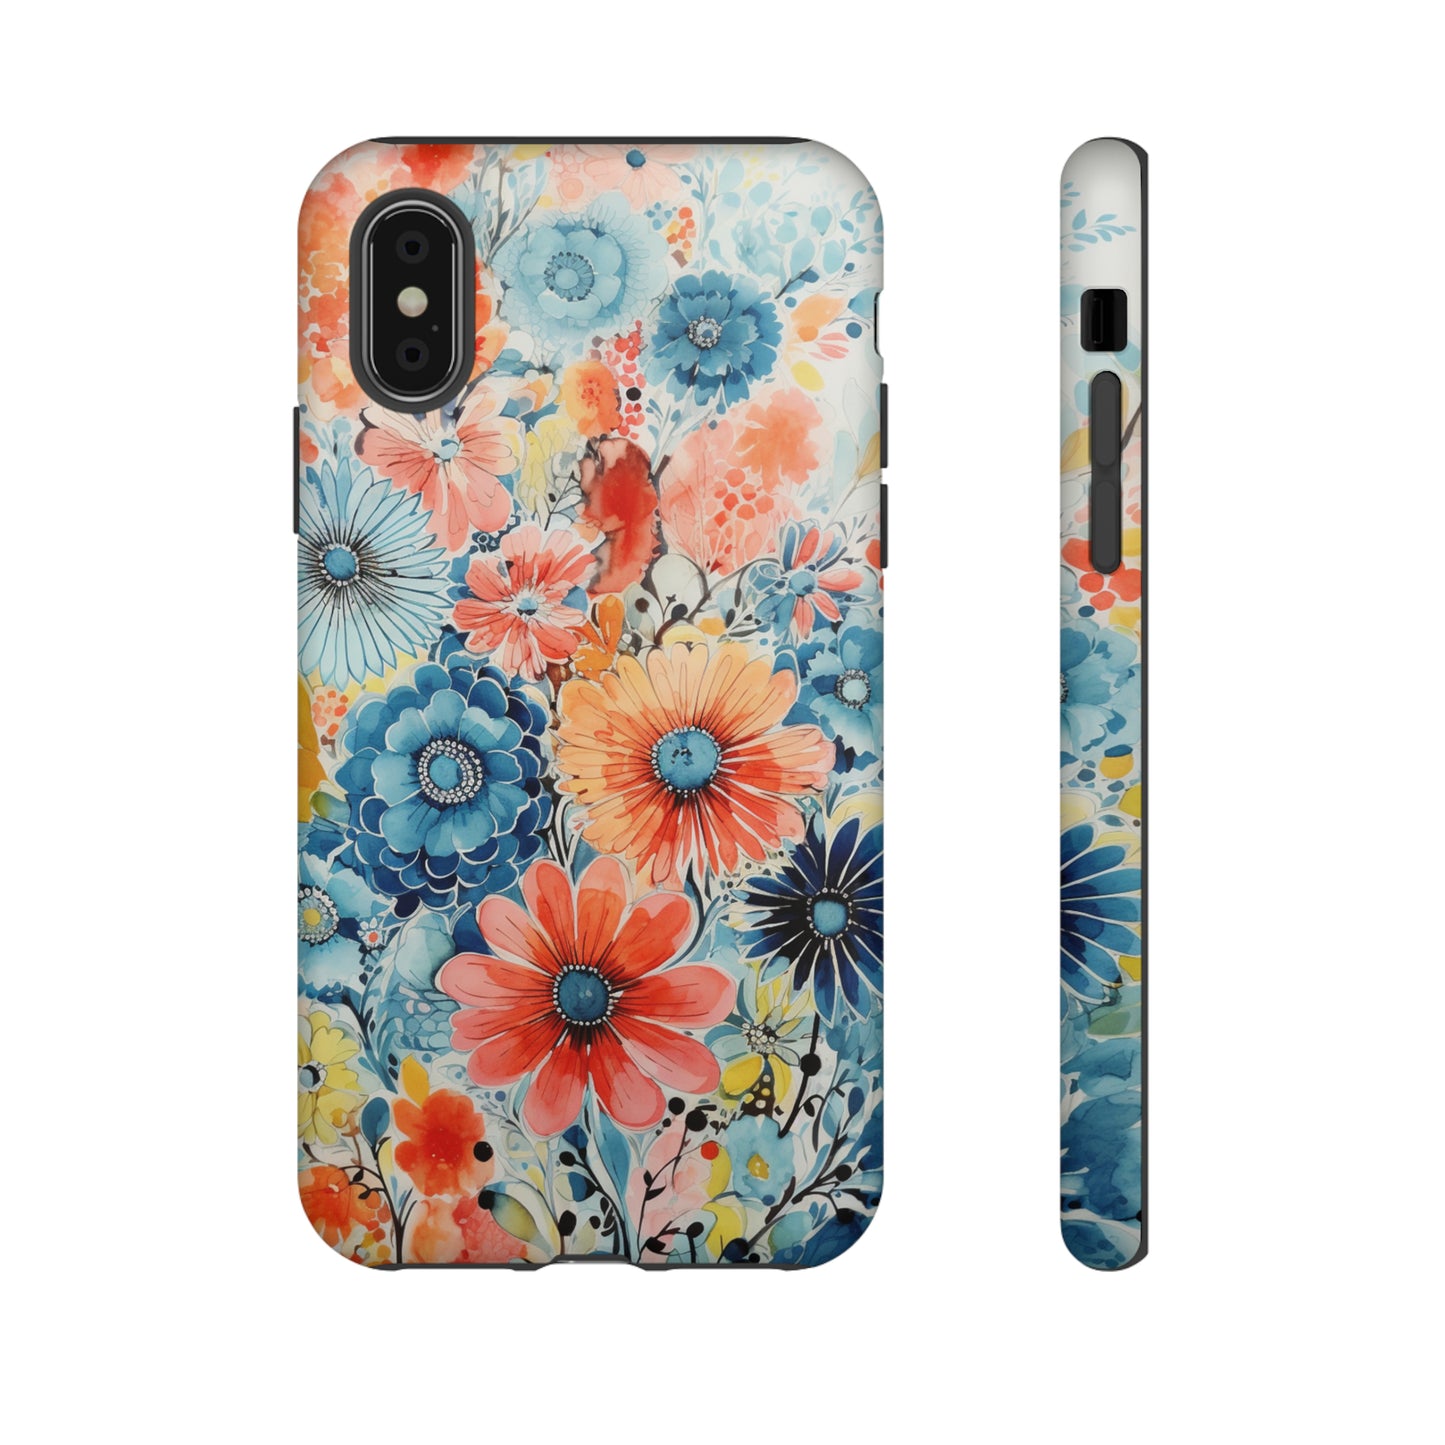 Floral watercolor cover for iPhone 12